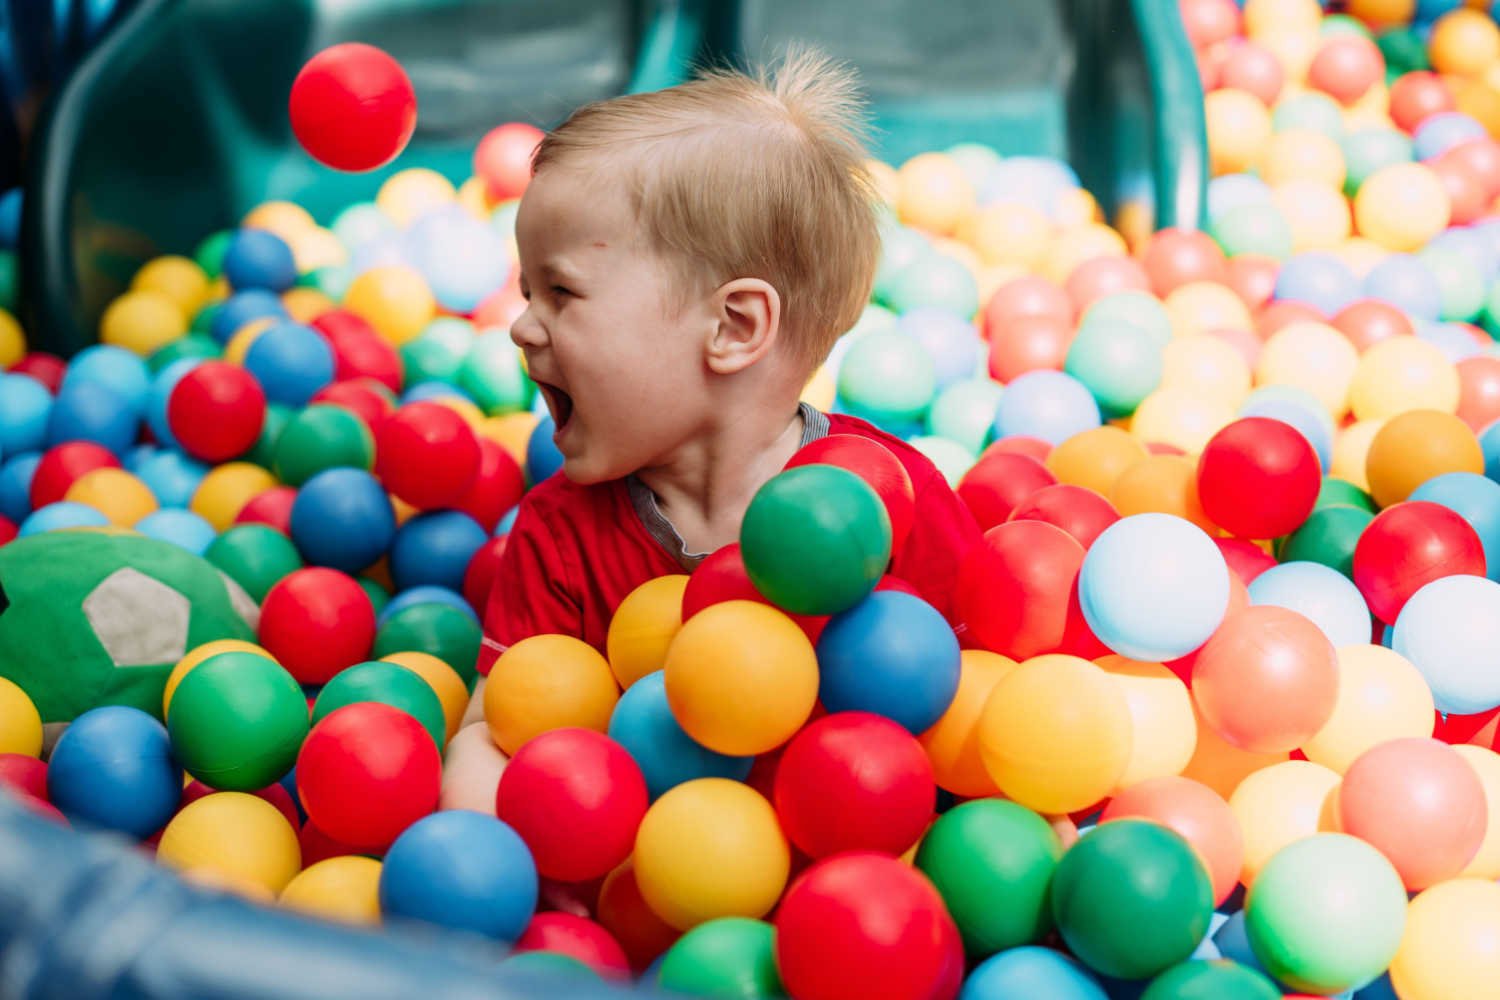 When Can Ball Pit Be Introduced To Babies?